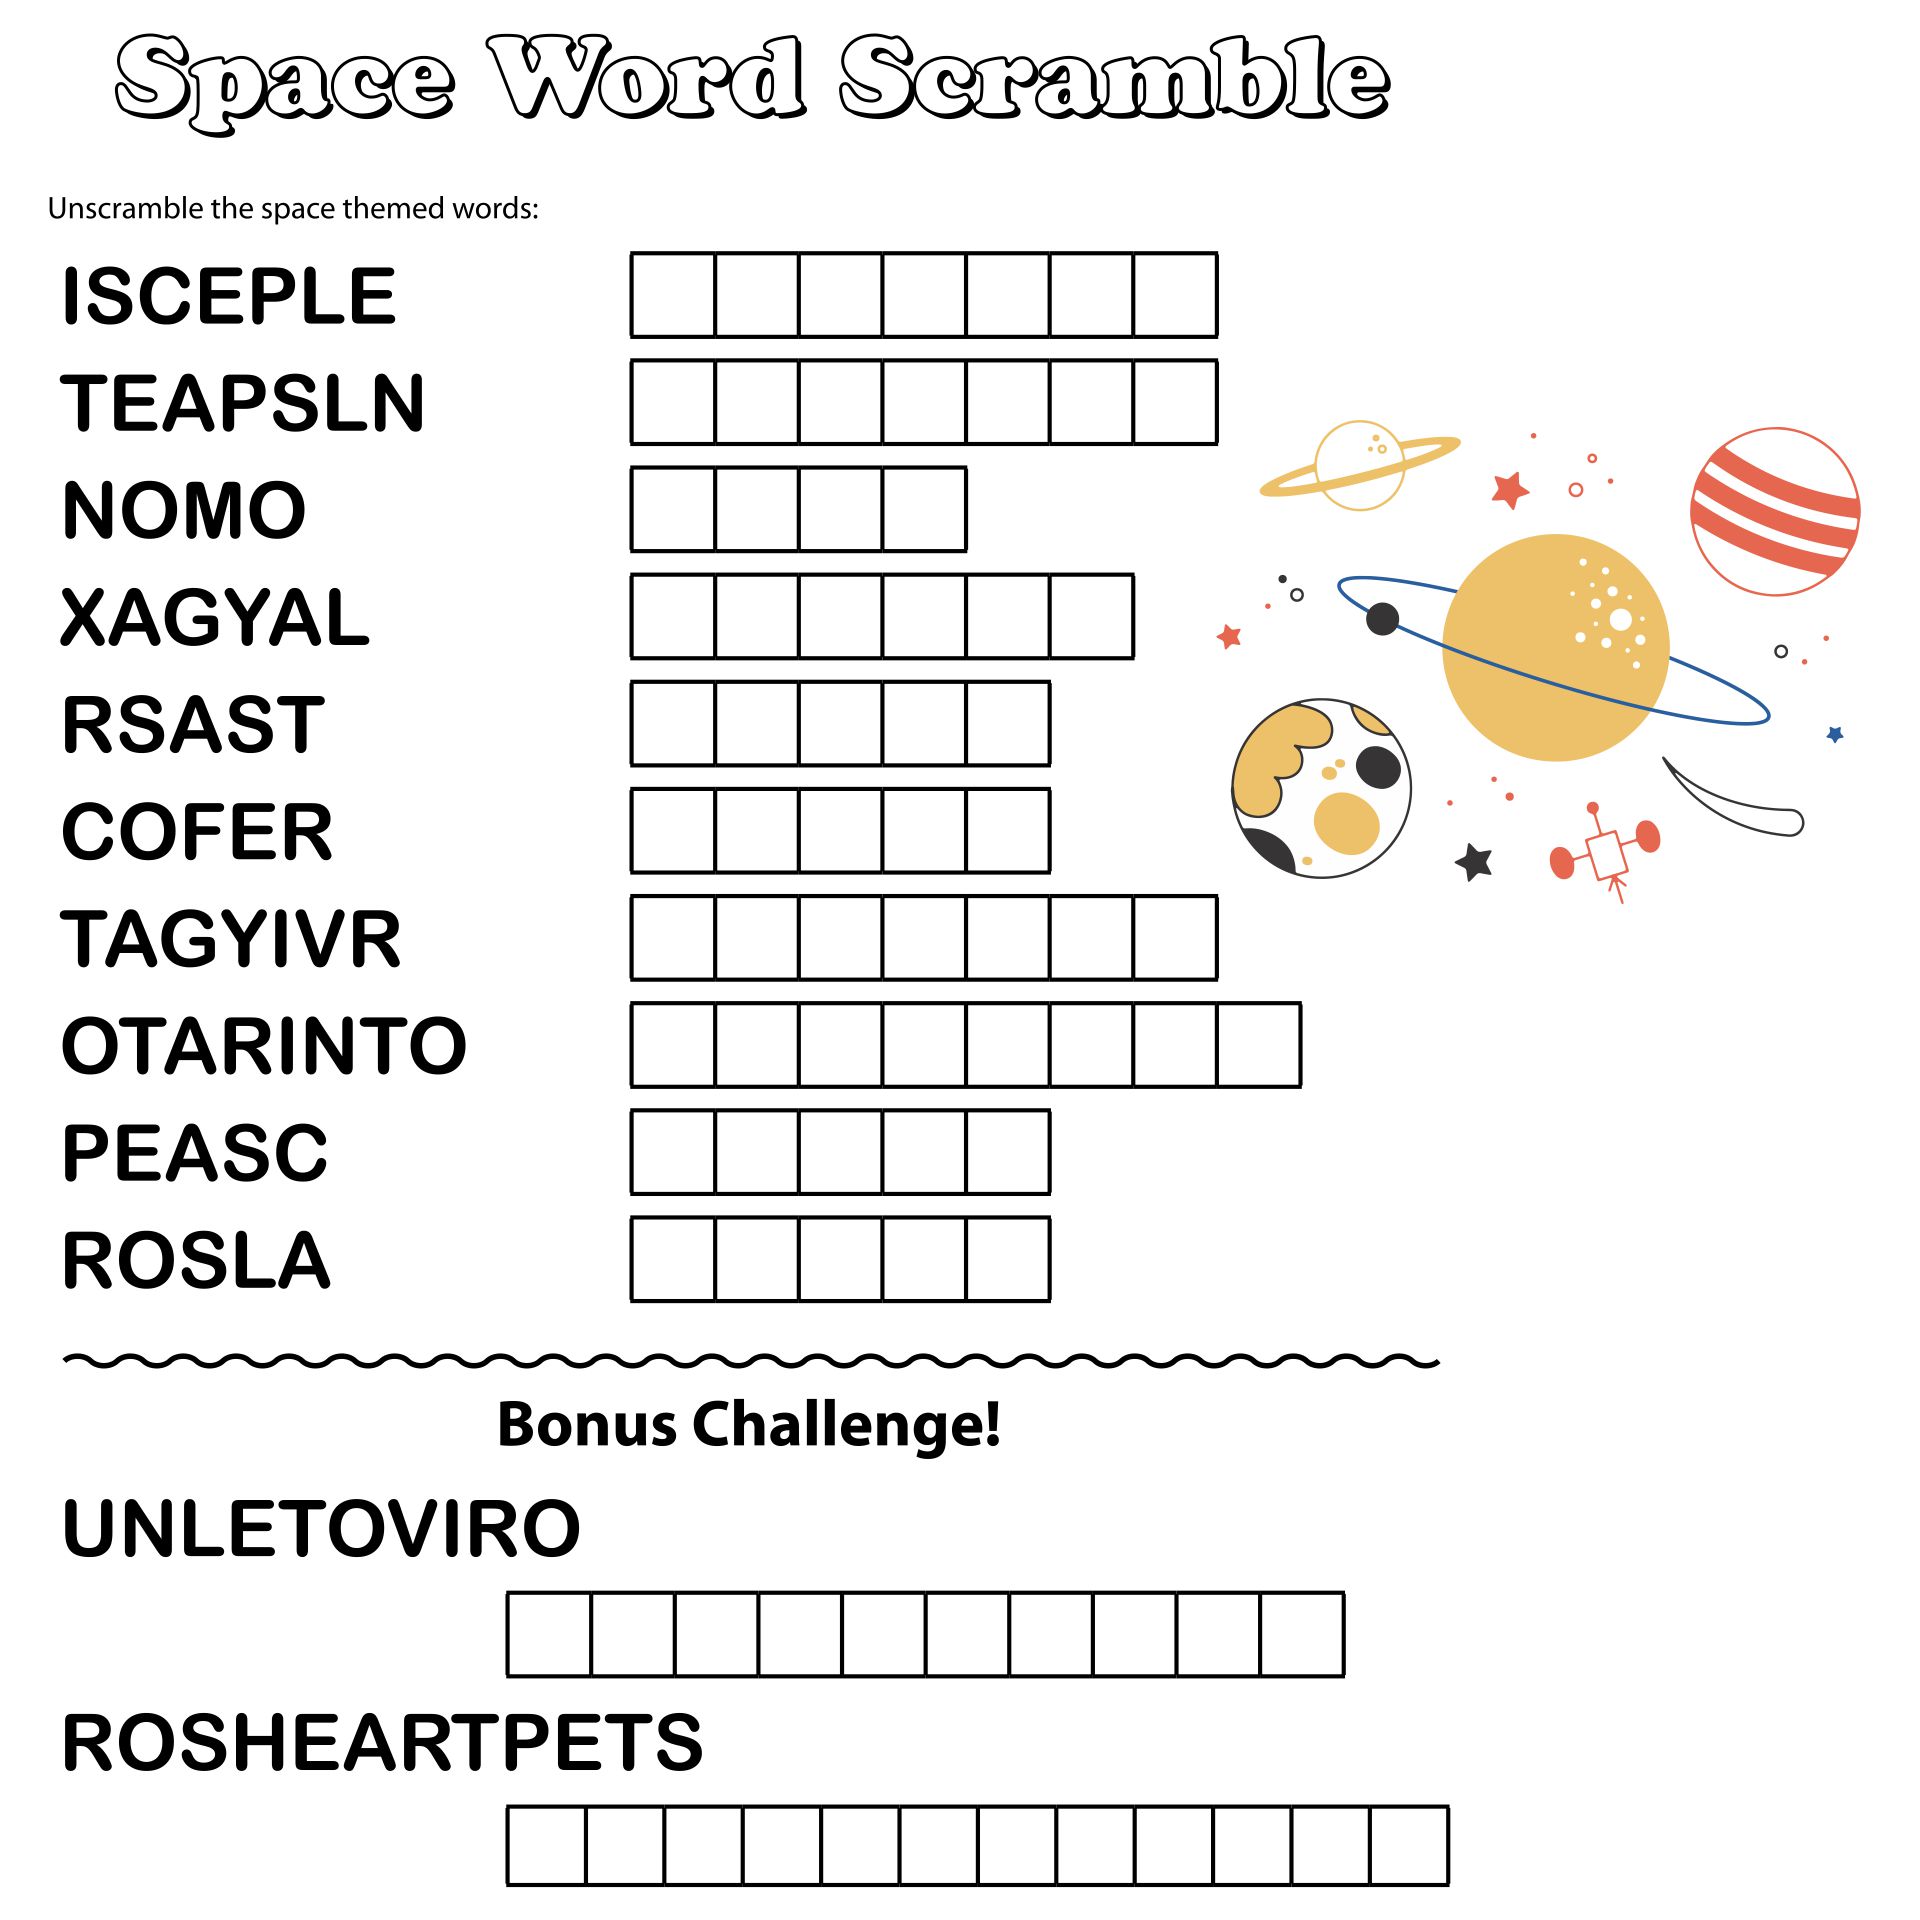 5-best-images-of-daily-jumble-word-puzzle-printable-free-printable